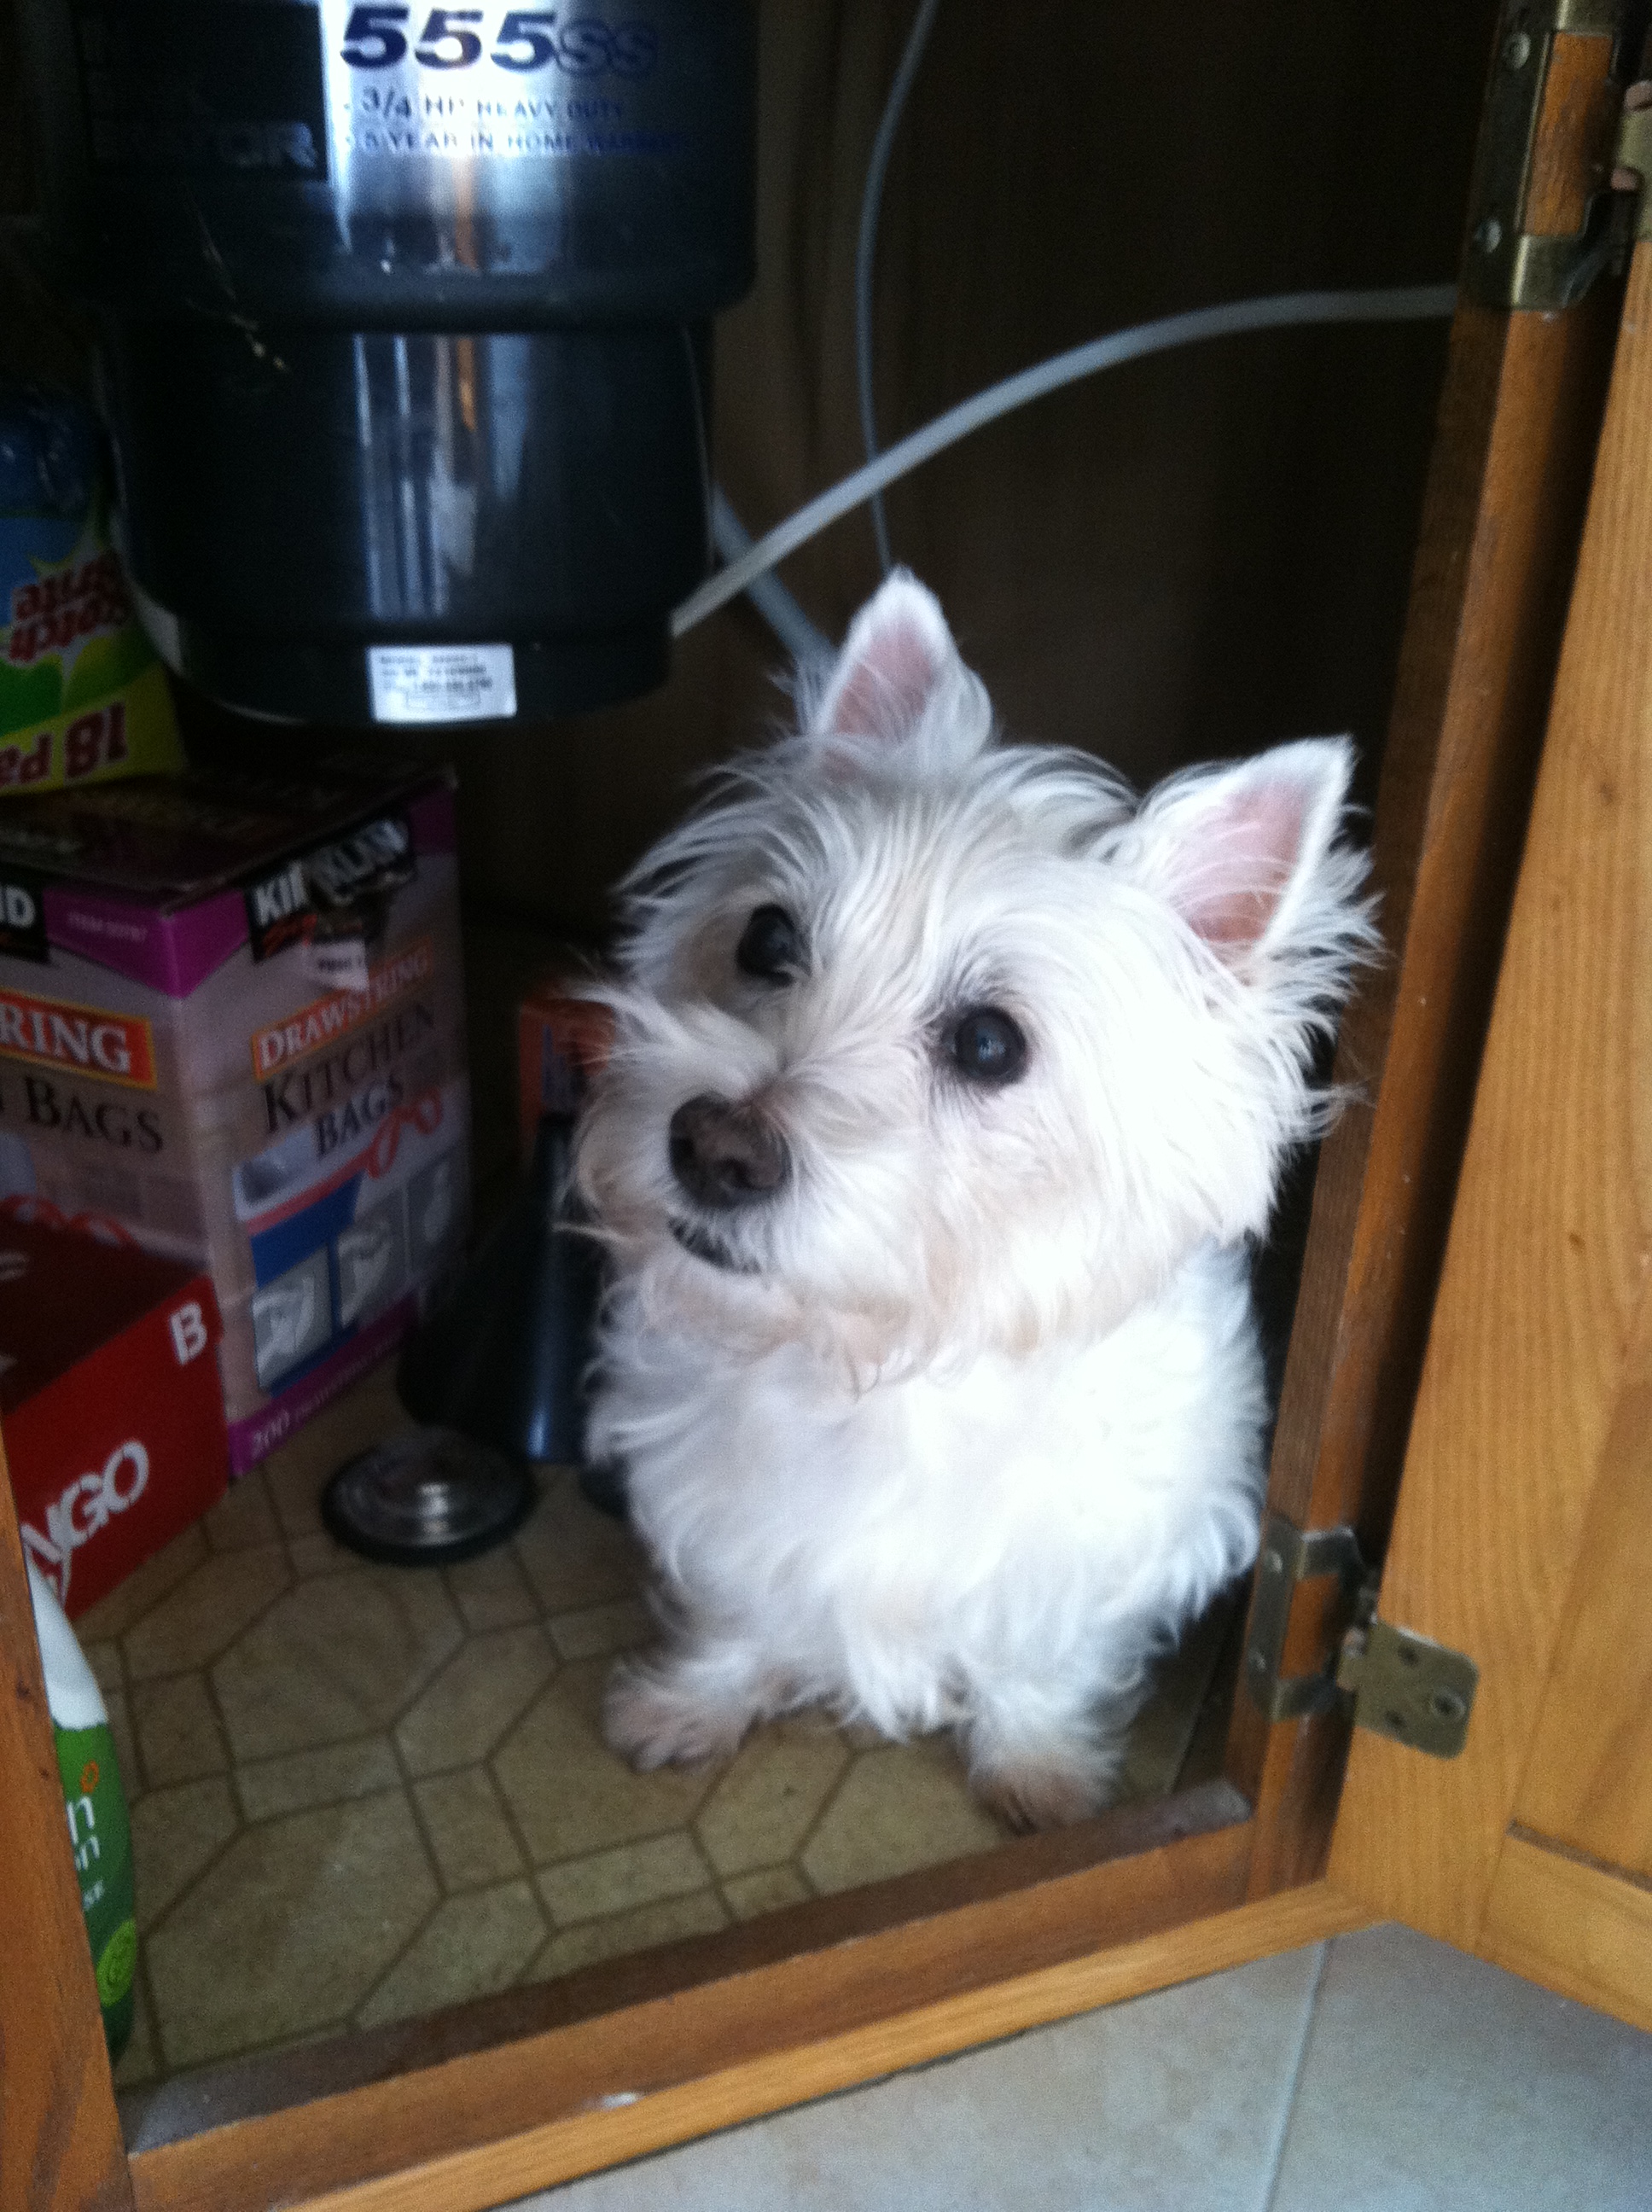 Lily Pad is my 11 year old Westie. In this picture, she  is hiding under the SINK/SYNC.